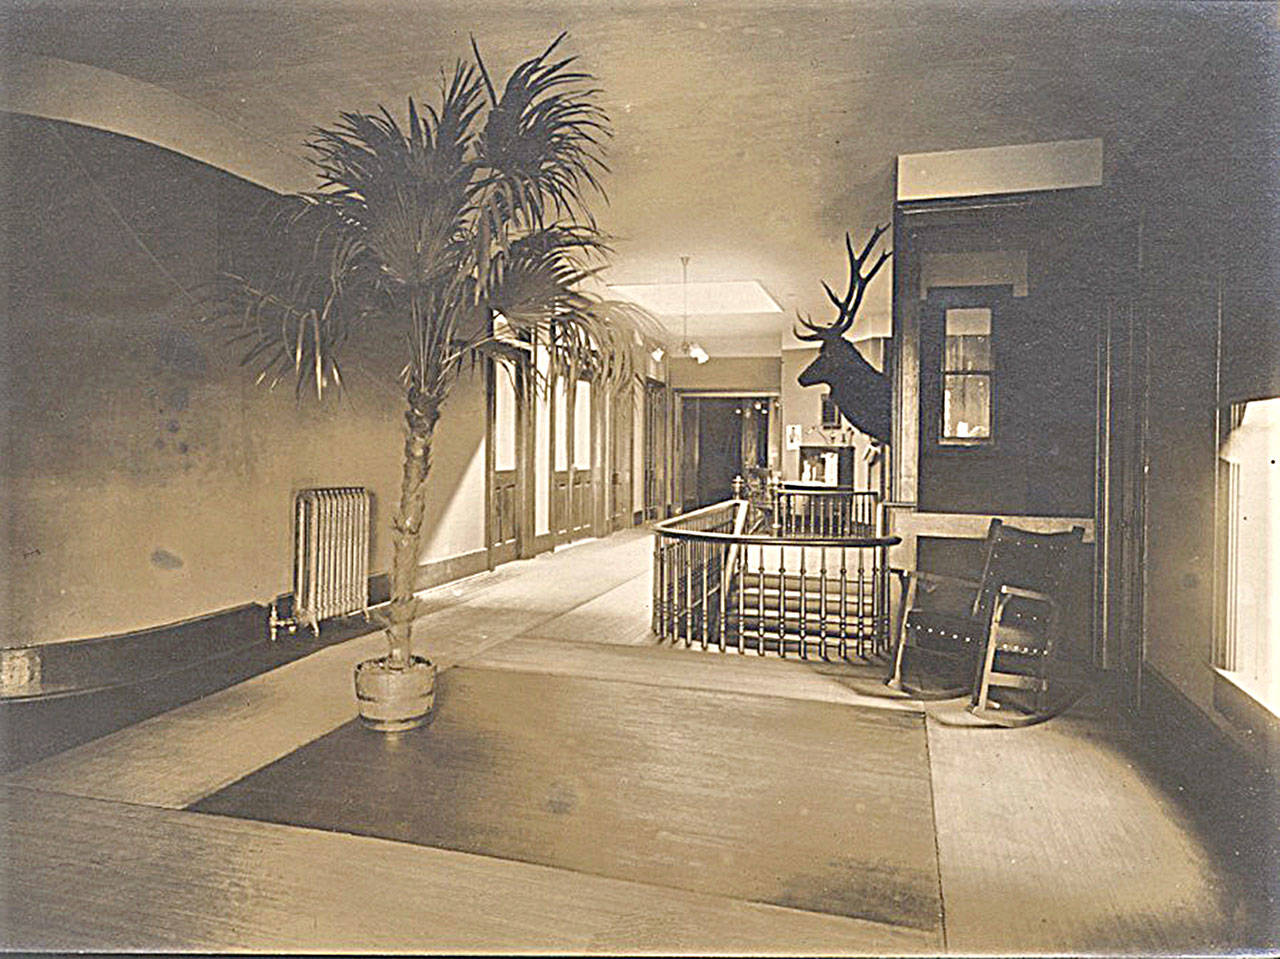 The vaguely creepy and unsettling second floor hallway of the Aberdeen General Hospital at the northwest corner of Heron and Broadway, circa 1905. Built as a private home, it was purchased in 1900 by Dr. Paul Smits, who transformed it into a hospital. After Smits’ death in 1916, it became the King Hotel, which it remained until the building was razed to make way for the J.C. Penney’s store in 1939. (Aberdeen Museum Collection)